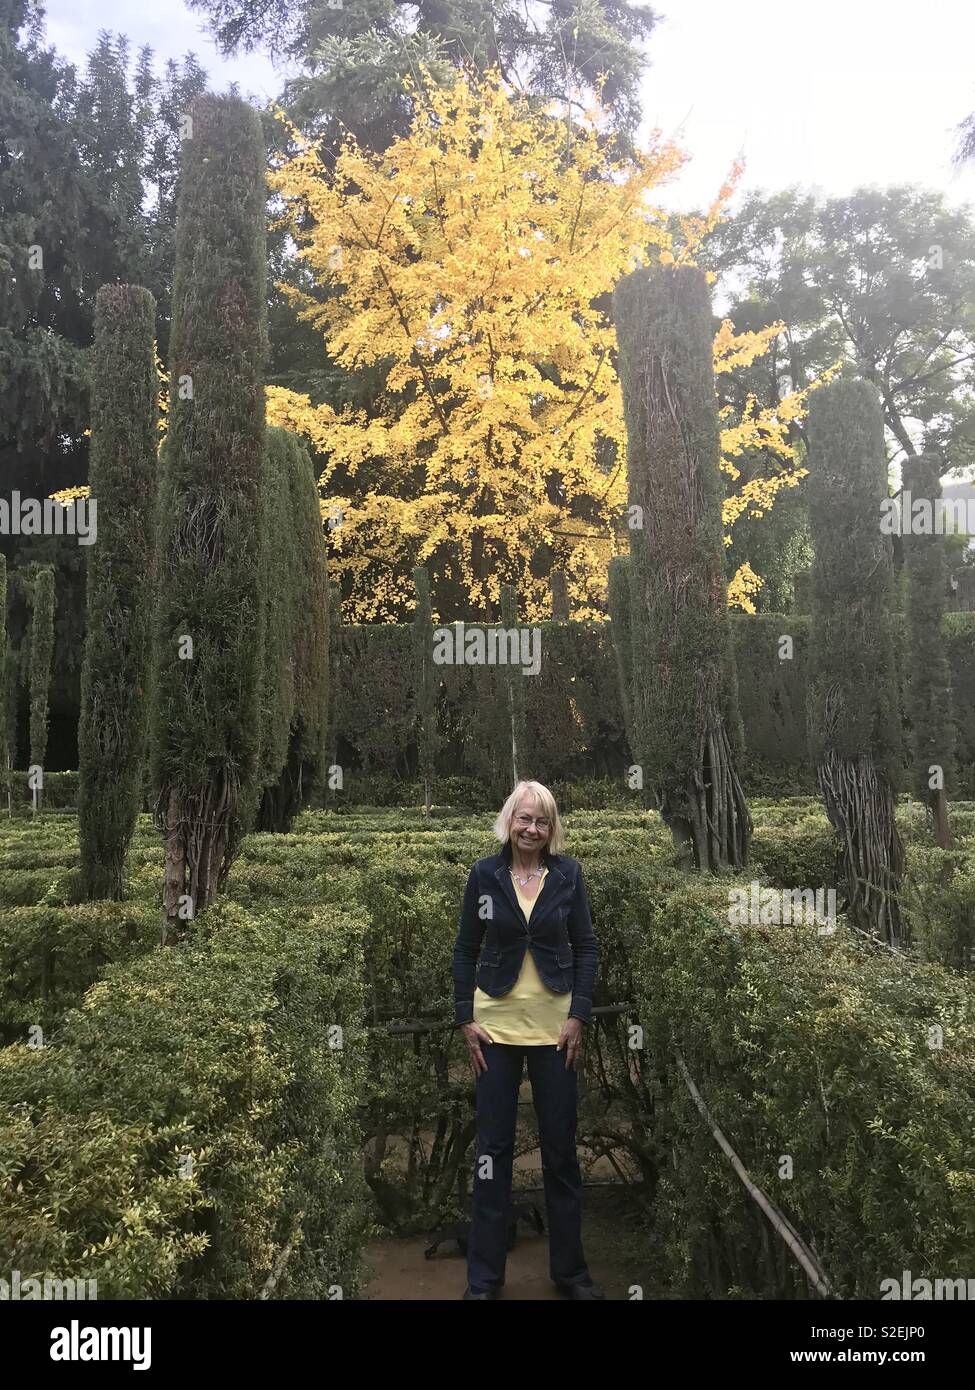 Woman in yellow in formal gardens with yellow tree Stock Photo